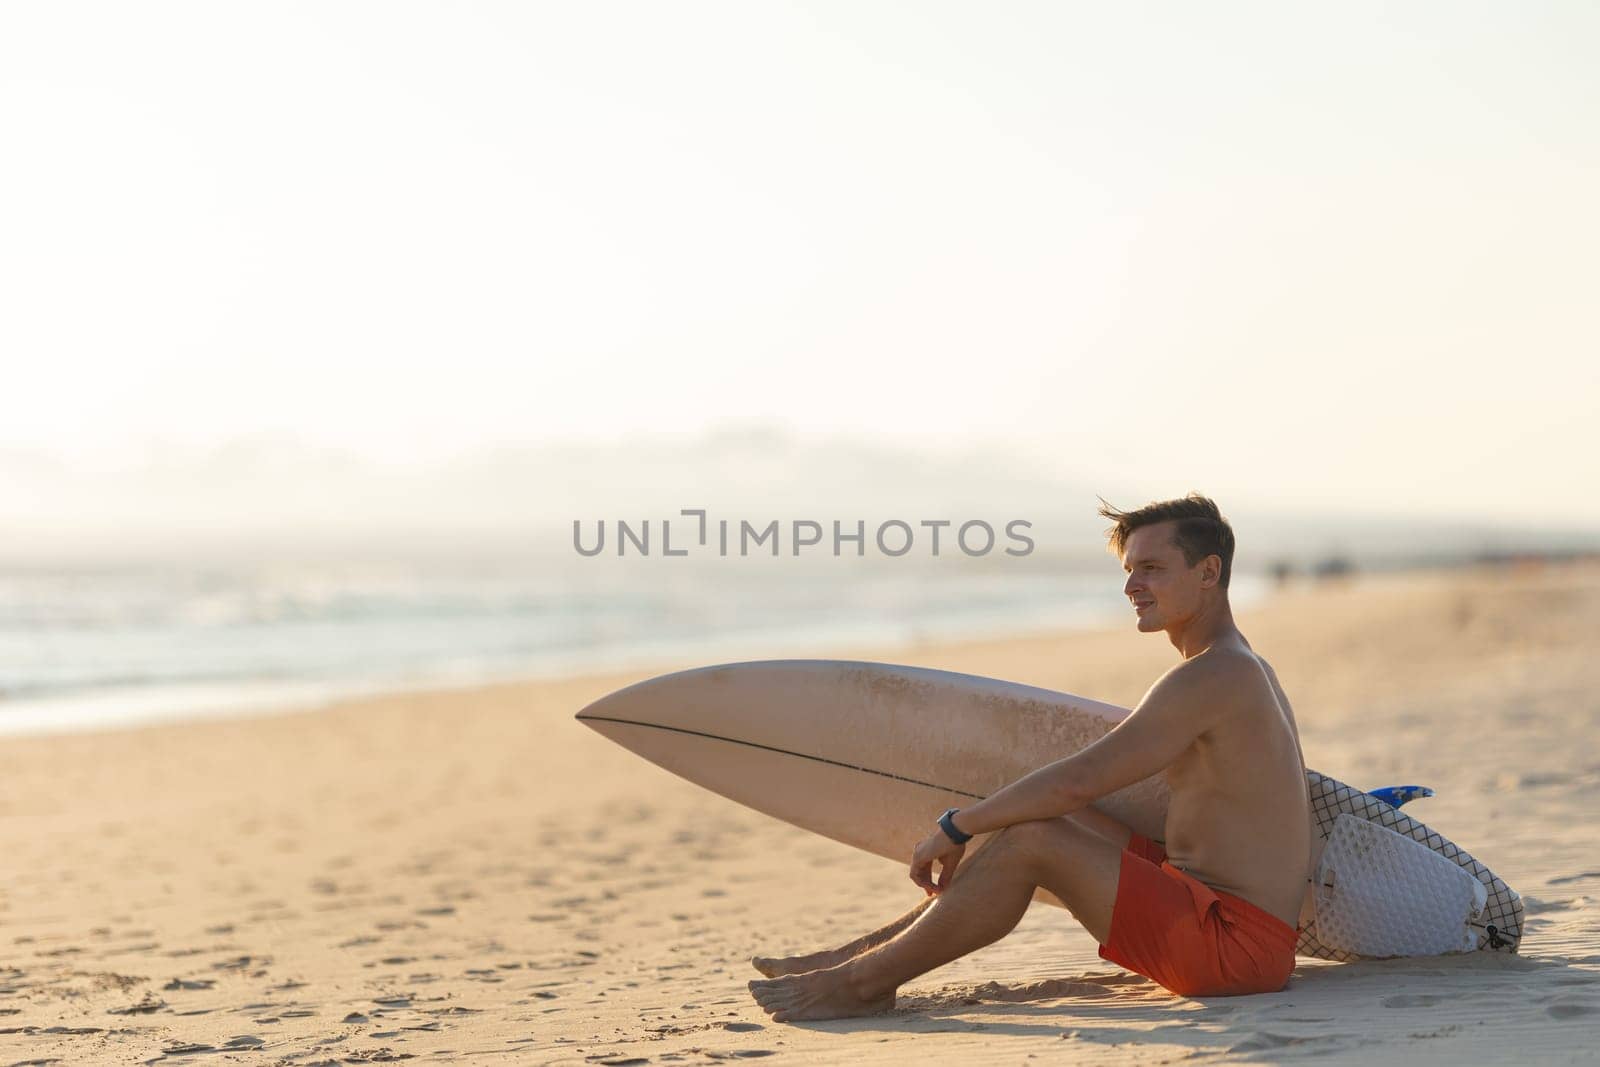 An attractive man with nice athletic body sitting on the shore holding a surfboard. Mid shot